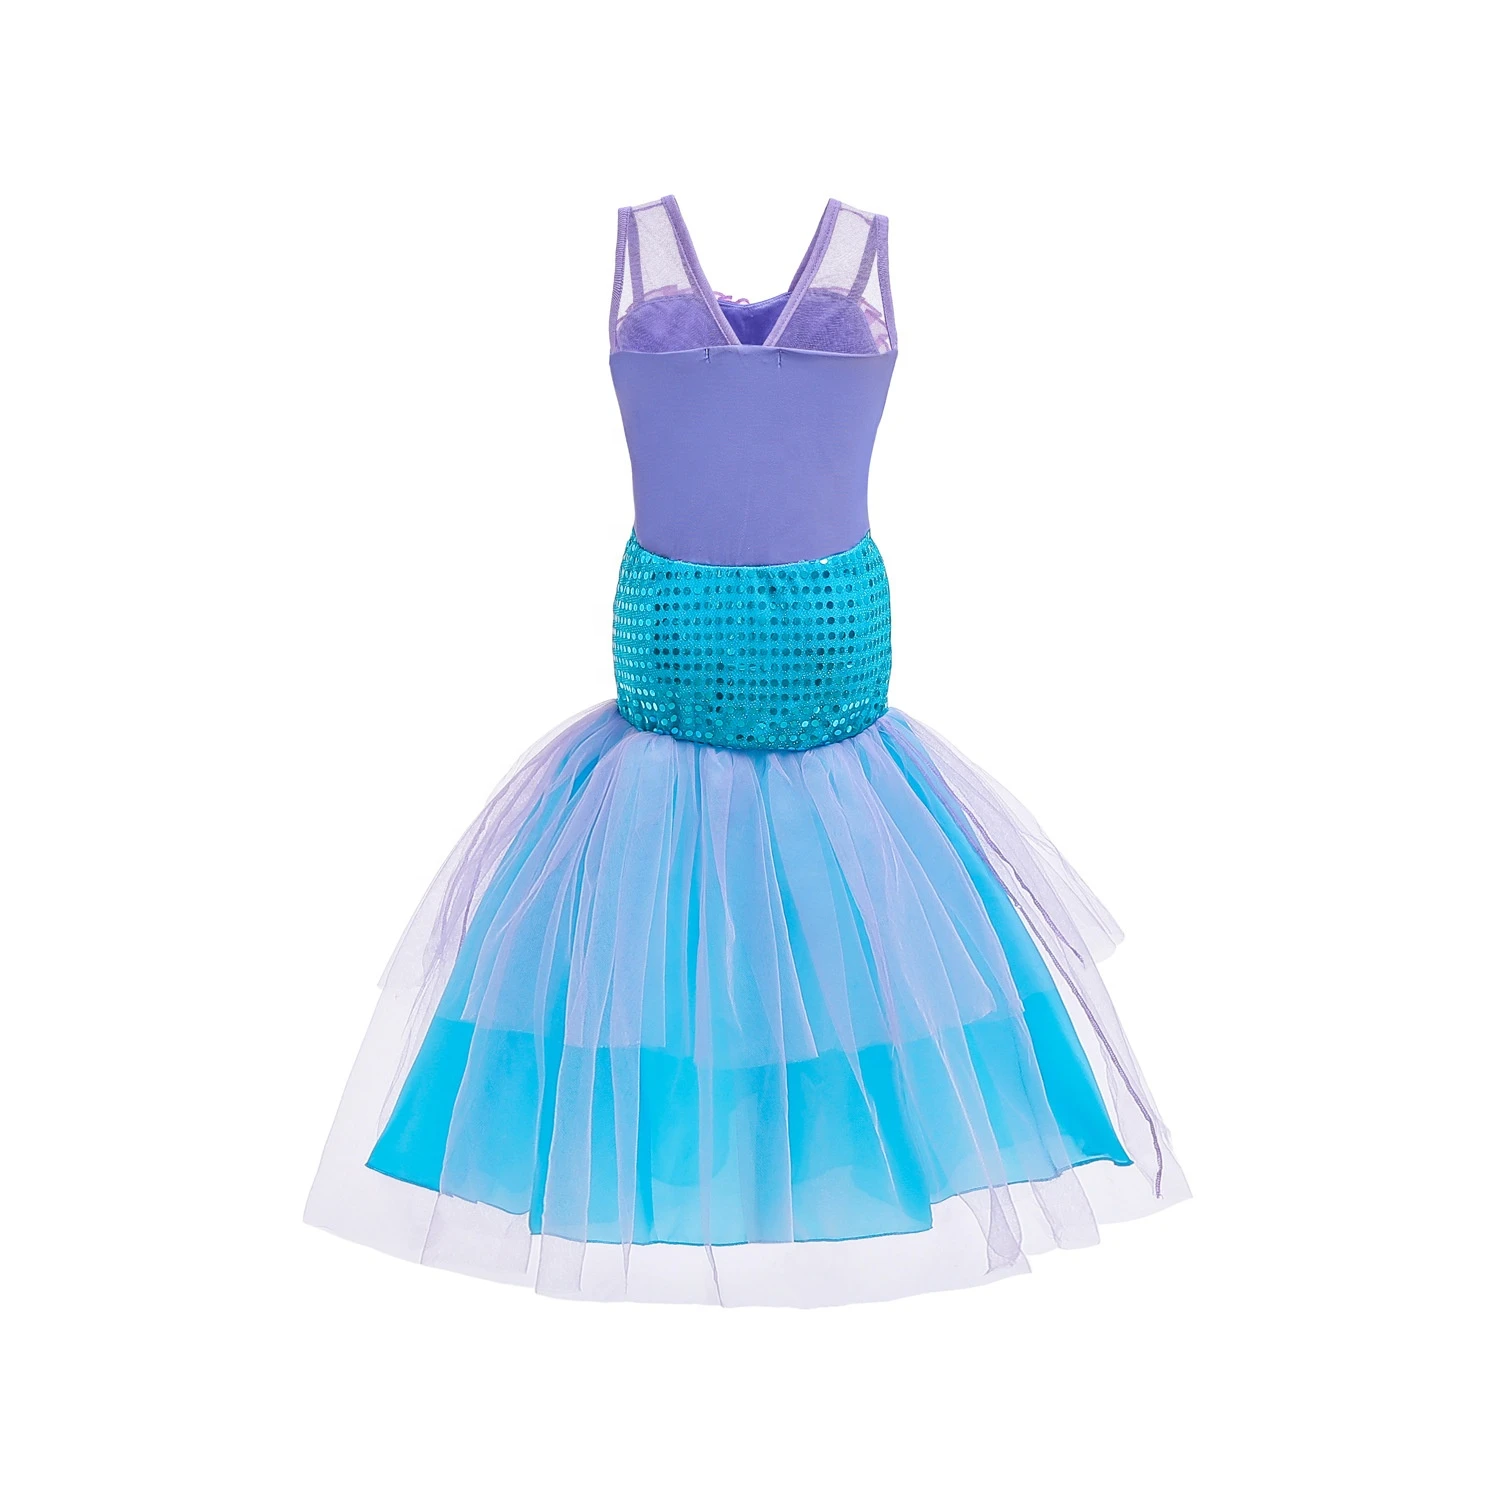 New Arrival Little Mermaid Ariel Princess Dress Fancy Girl Children Carnival Cosplay Party Costumes